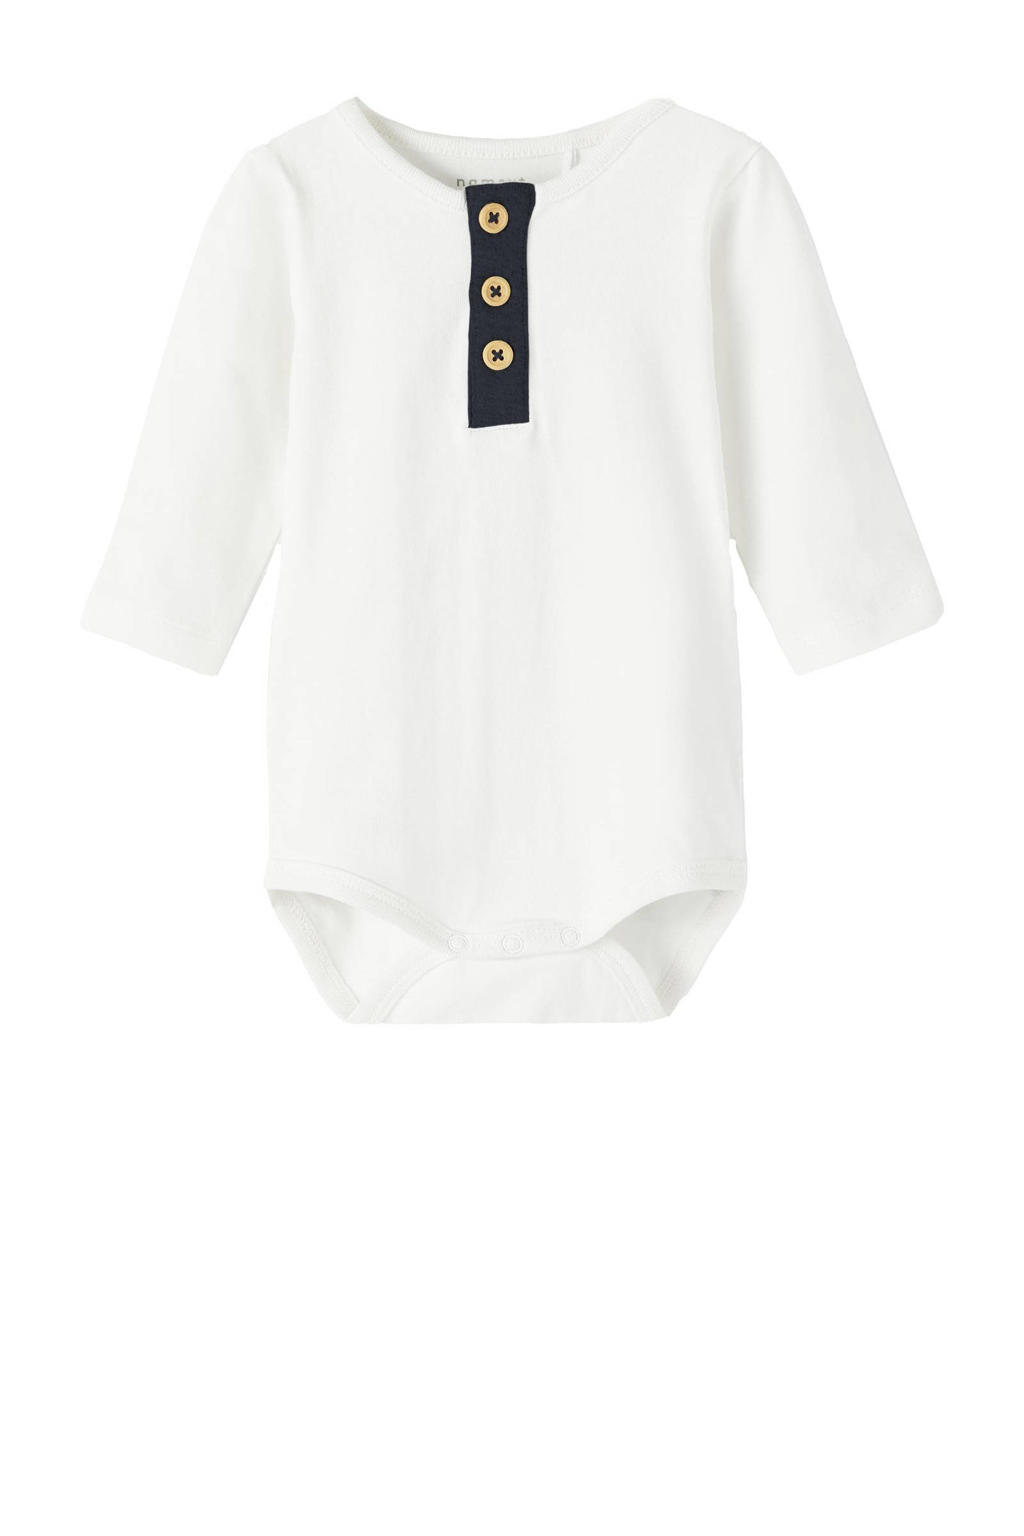 NAME IT BABY romper wit